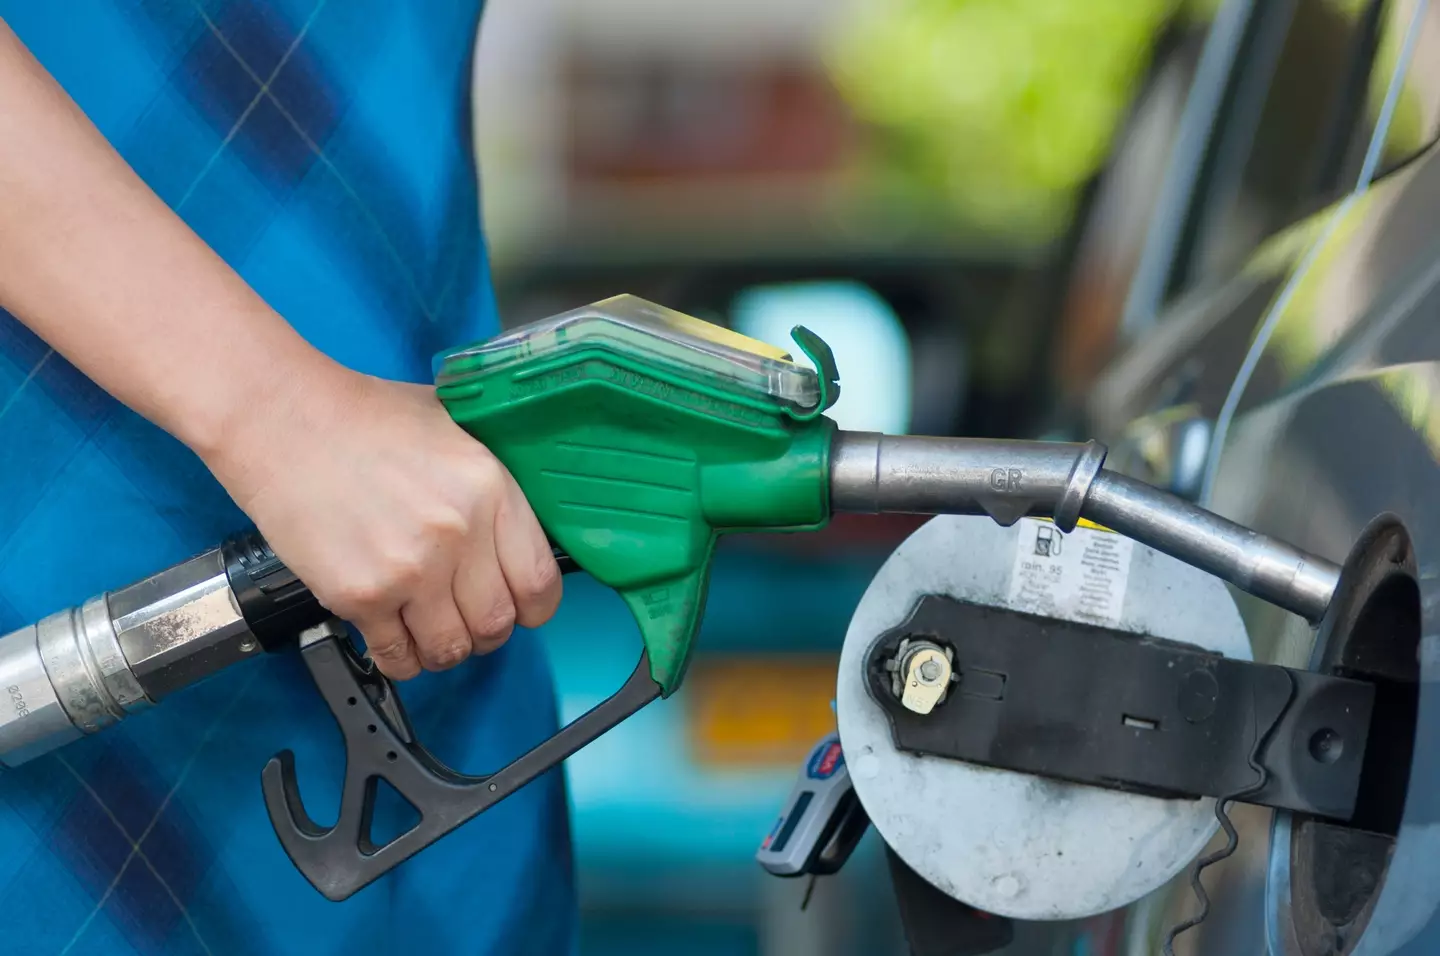 The price at the pump has been affected by the fall of the pound.